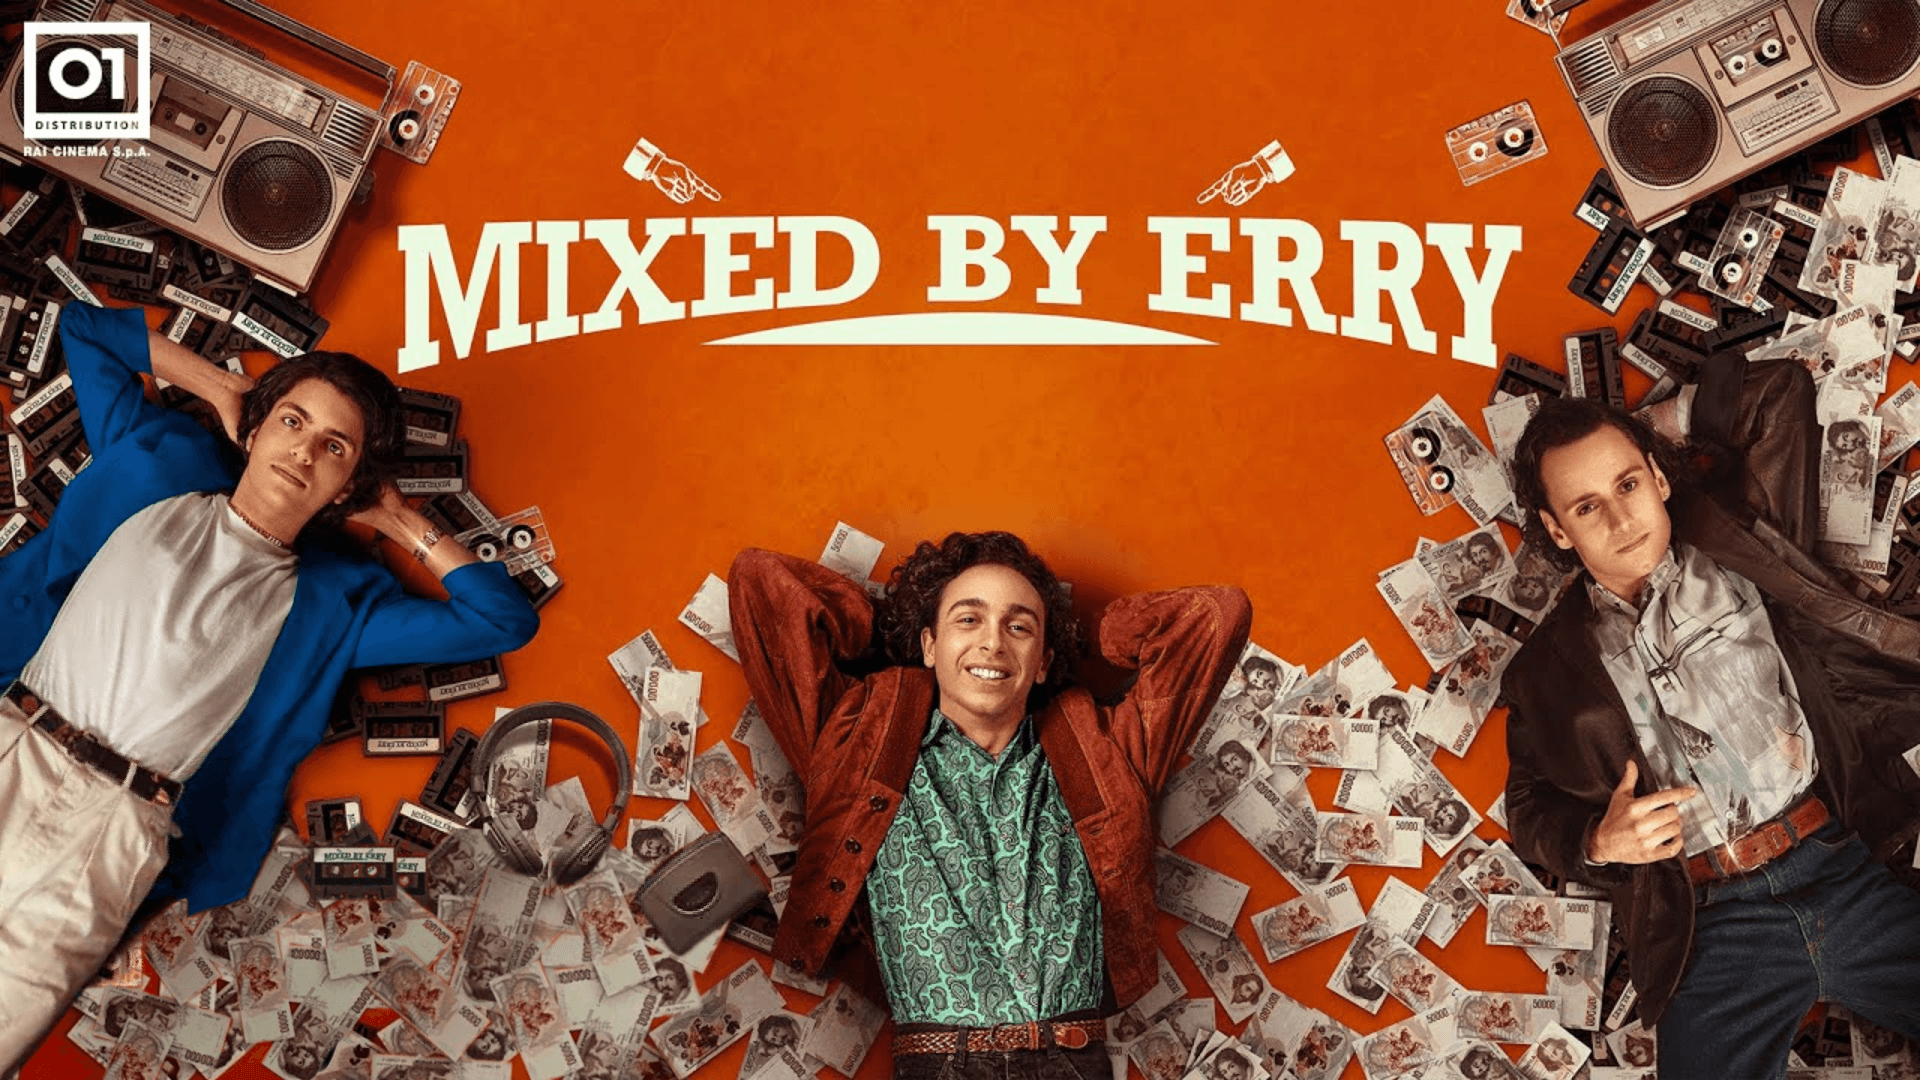 Mixed by Erry Marco Romano